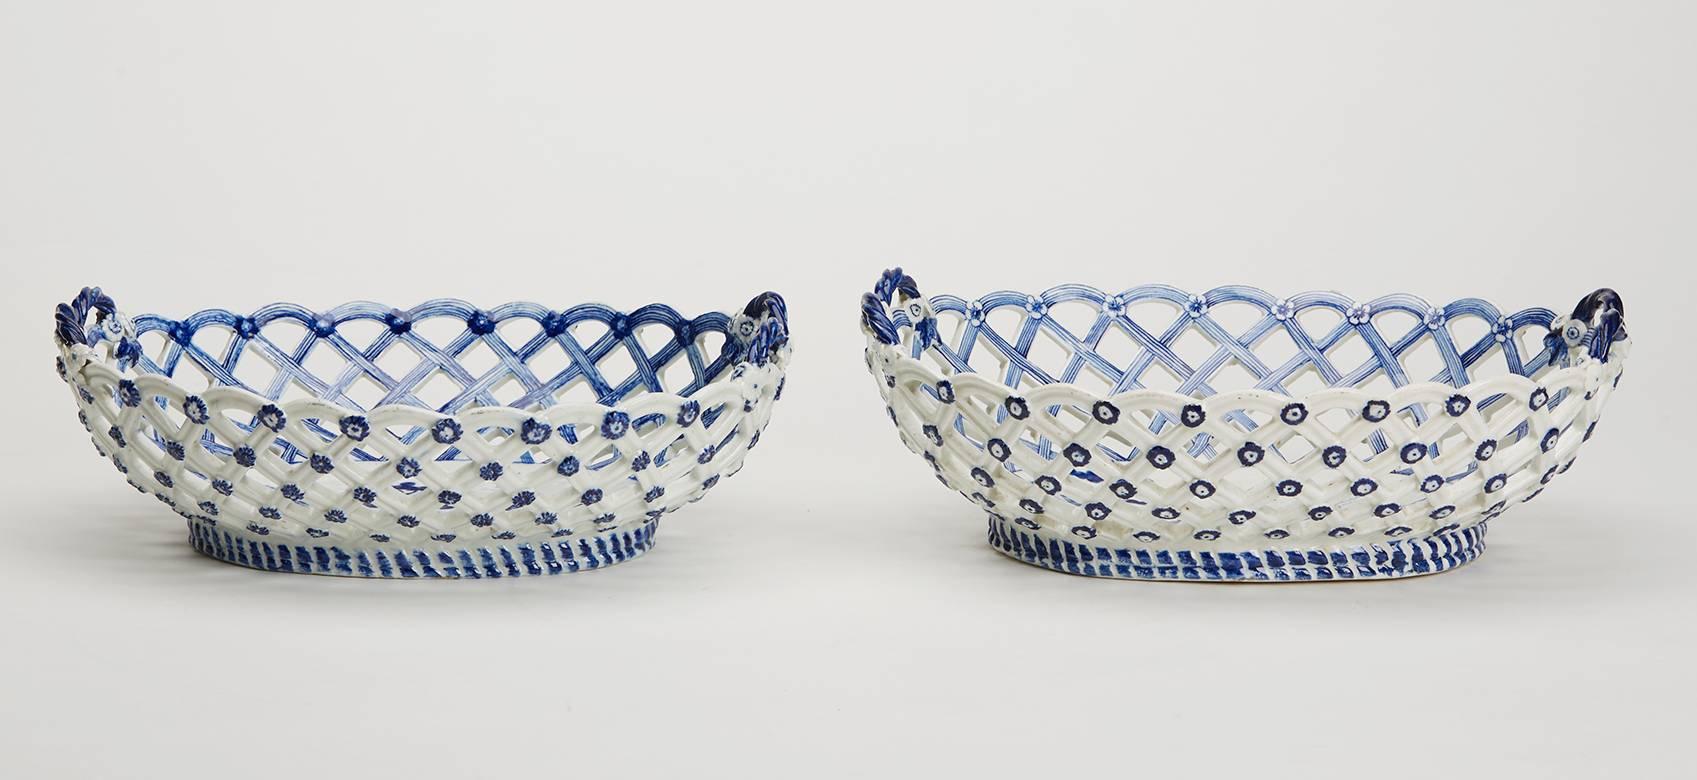 English Pair of Antique Derby Reticulated Chinoiserie Baskets, circa 1760